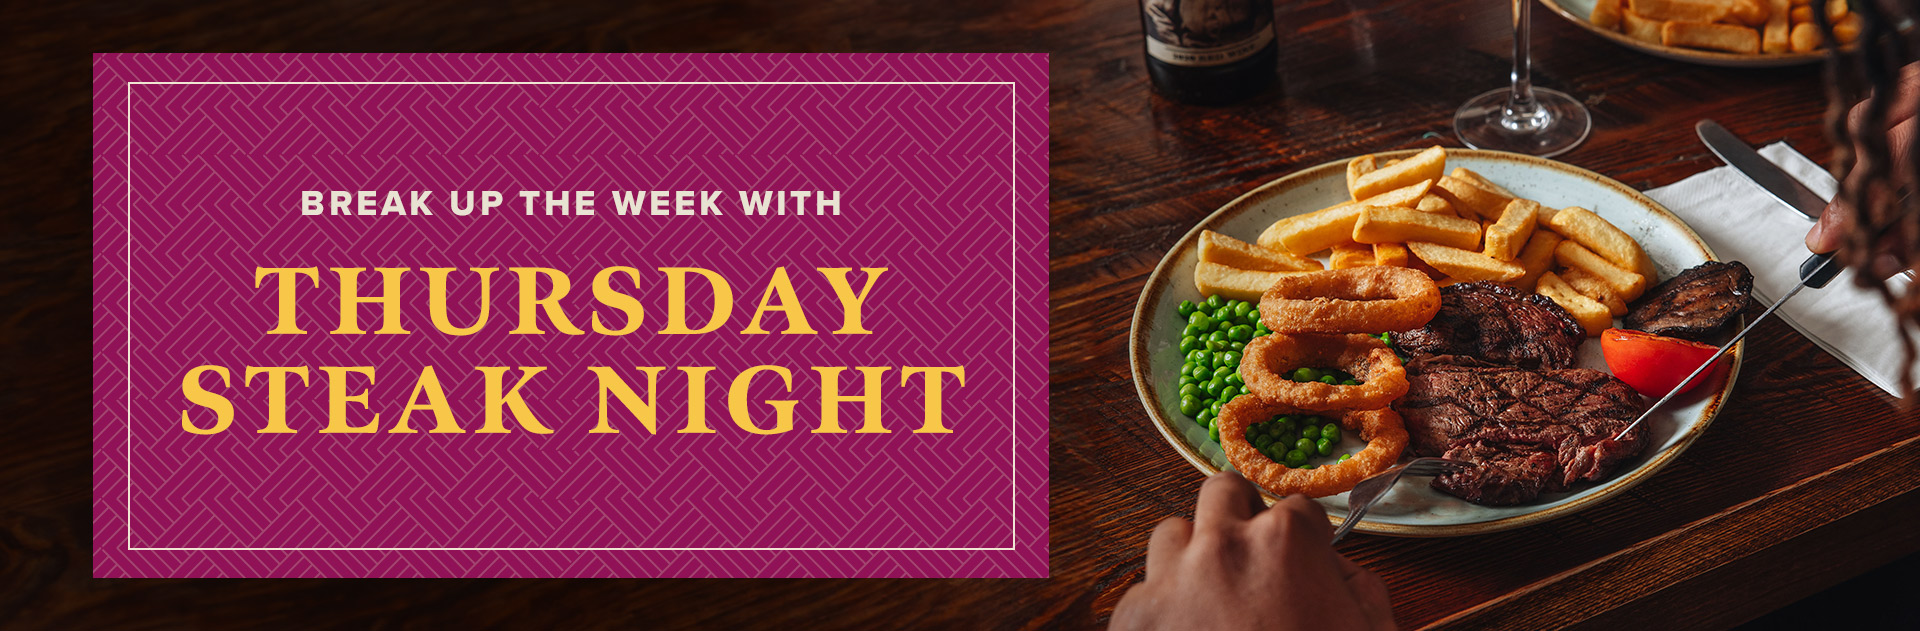 Thursday Steak Night at The Three Stags